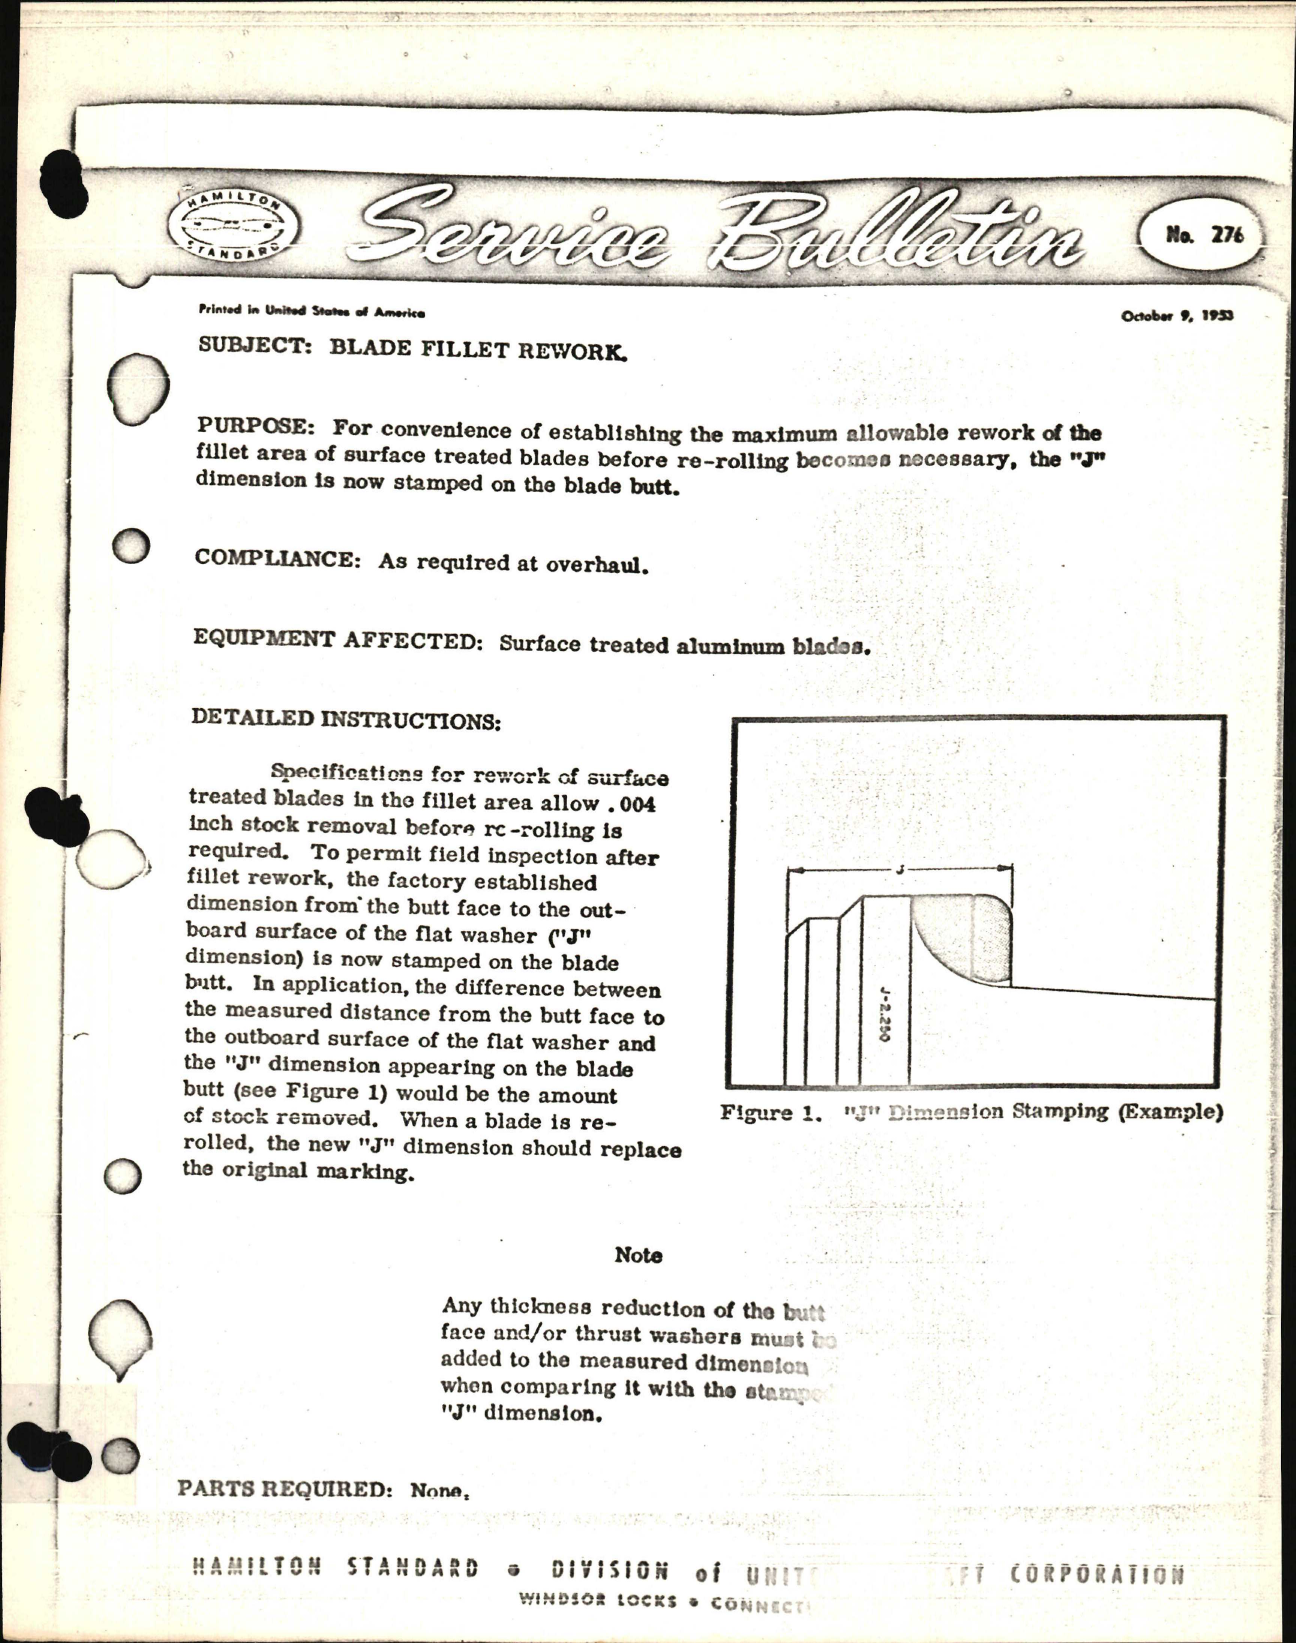 Sample page 1 from AirCorps Library document: Blade Fillet Rework